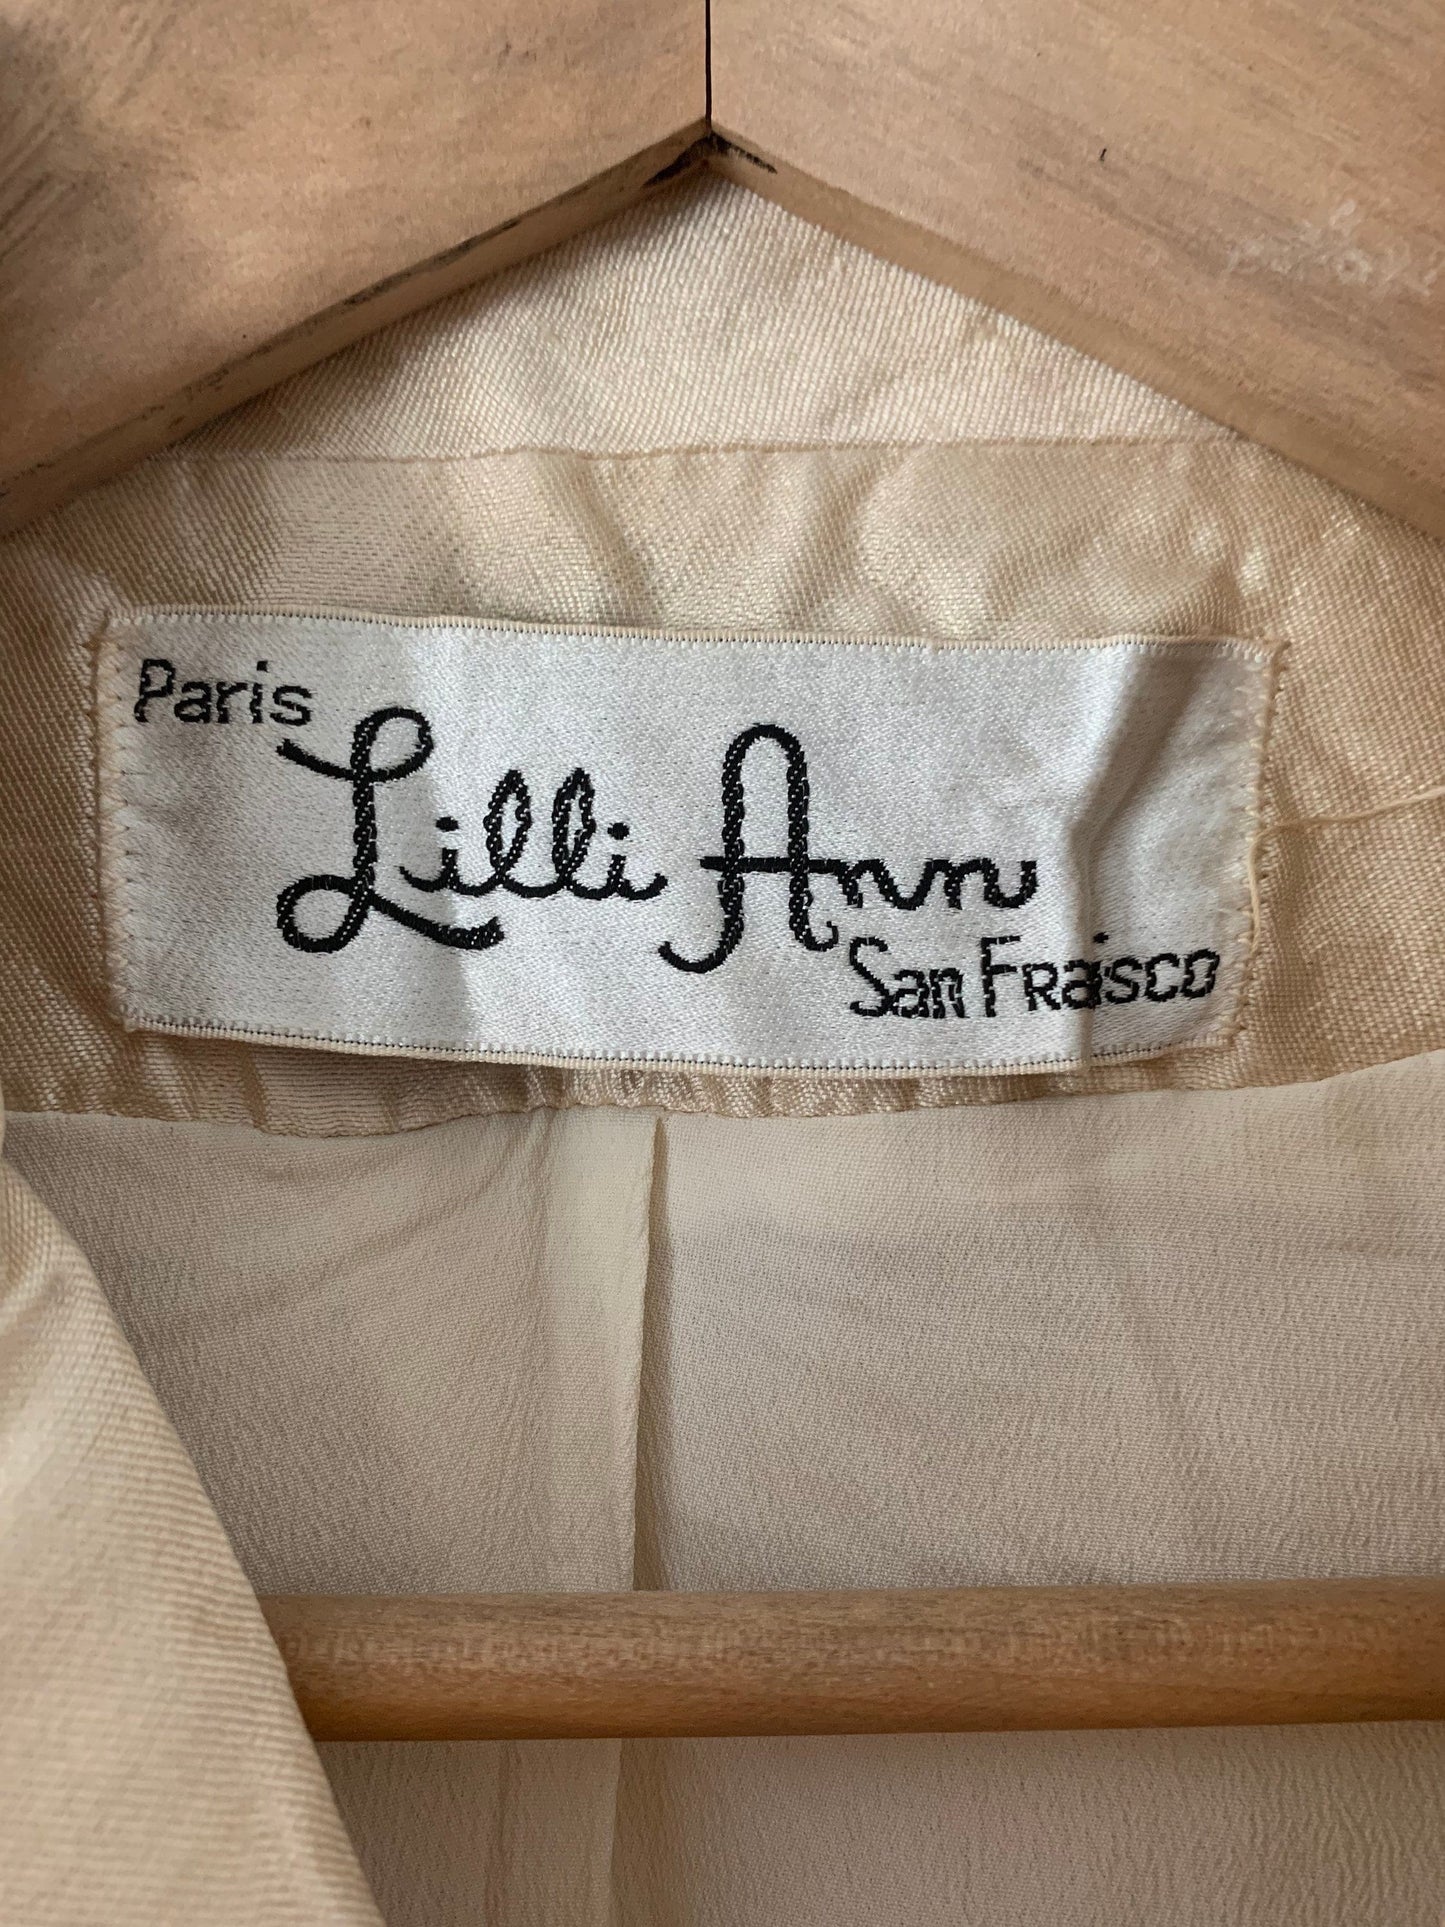 Vintage Lilli Ann Silk Jacket - Silk Chiffon Lined - Cream Gold Sheen Ladies Day Jacket Absolutely Stunning - 1950s Immaculate